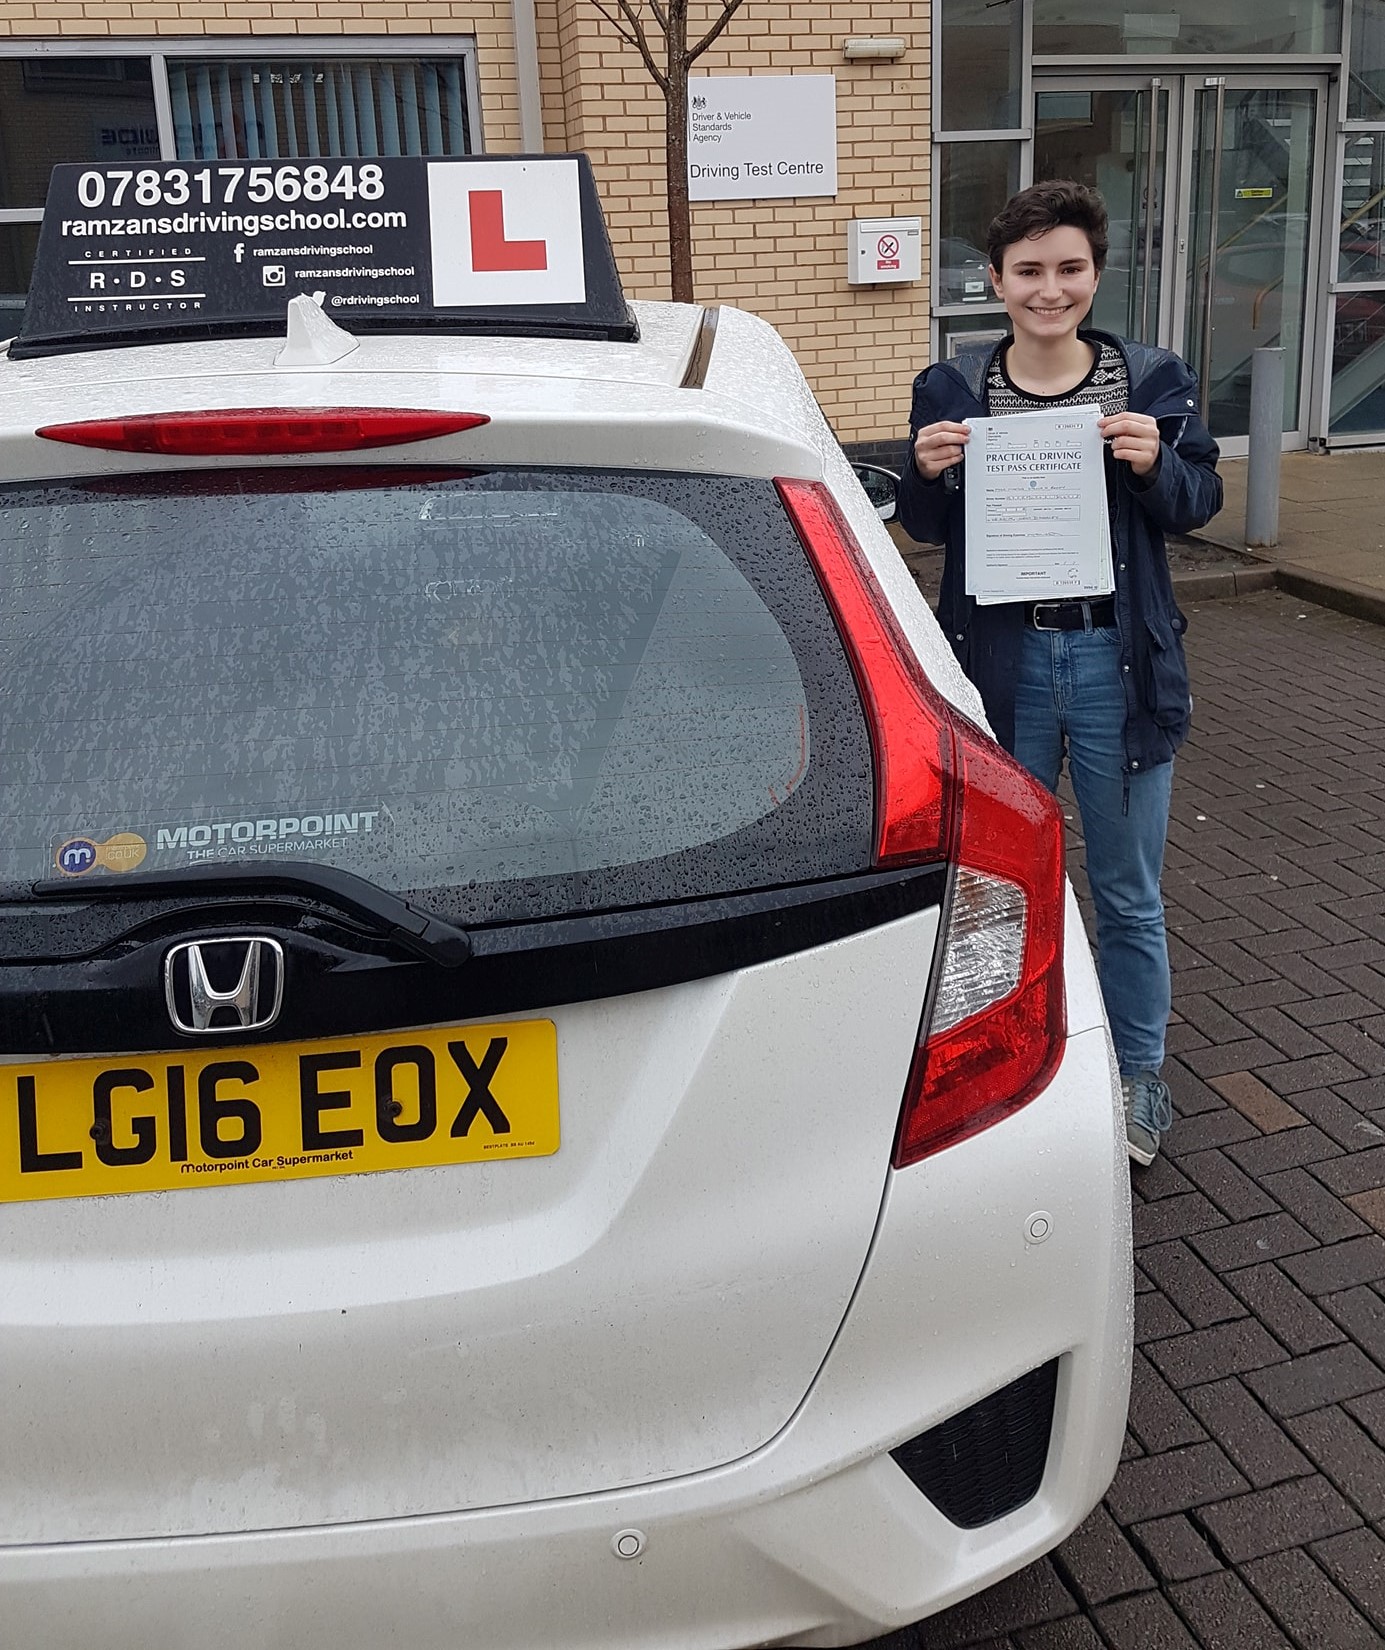 Image of a learner driver showing their test certificate